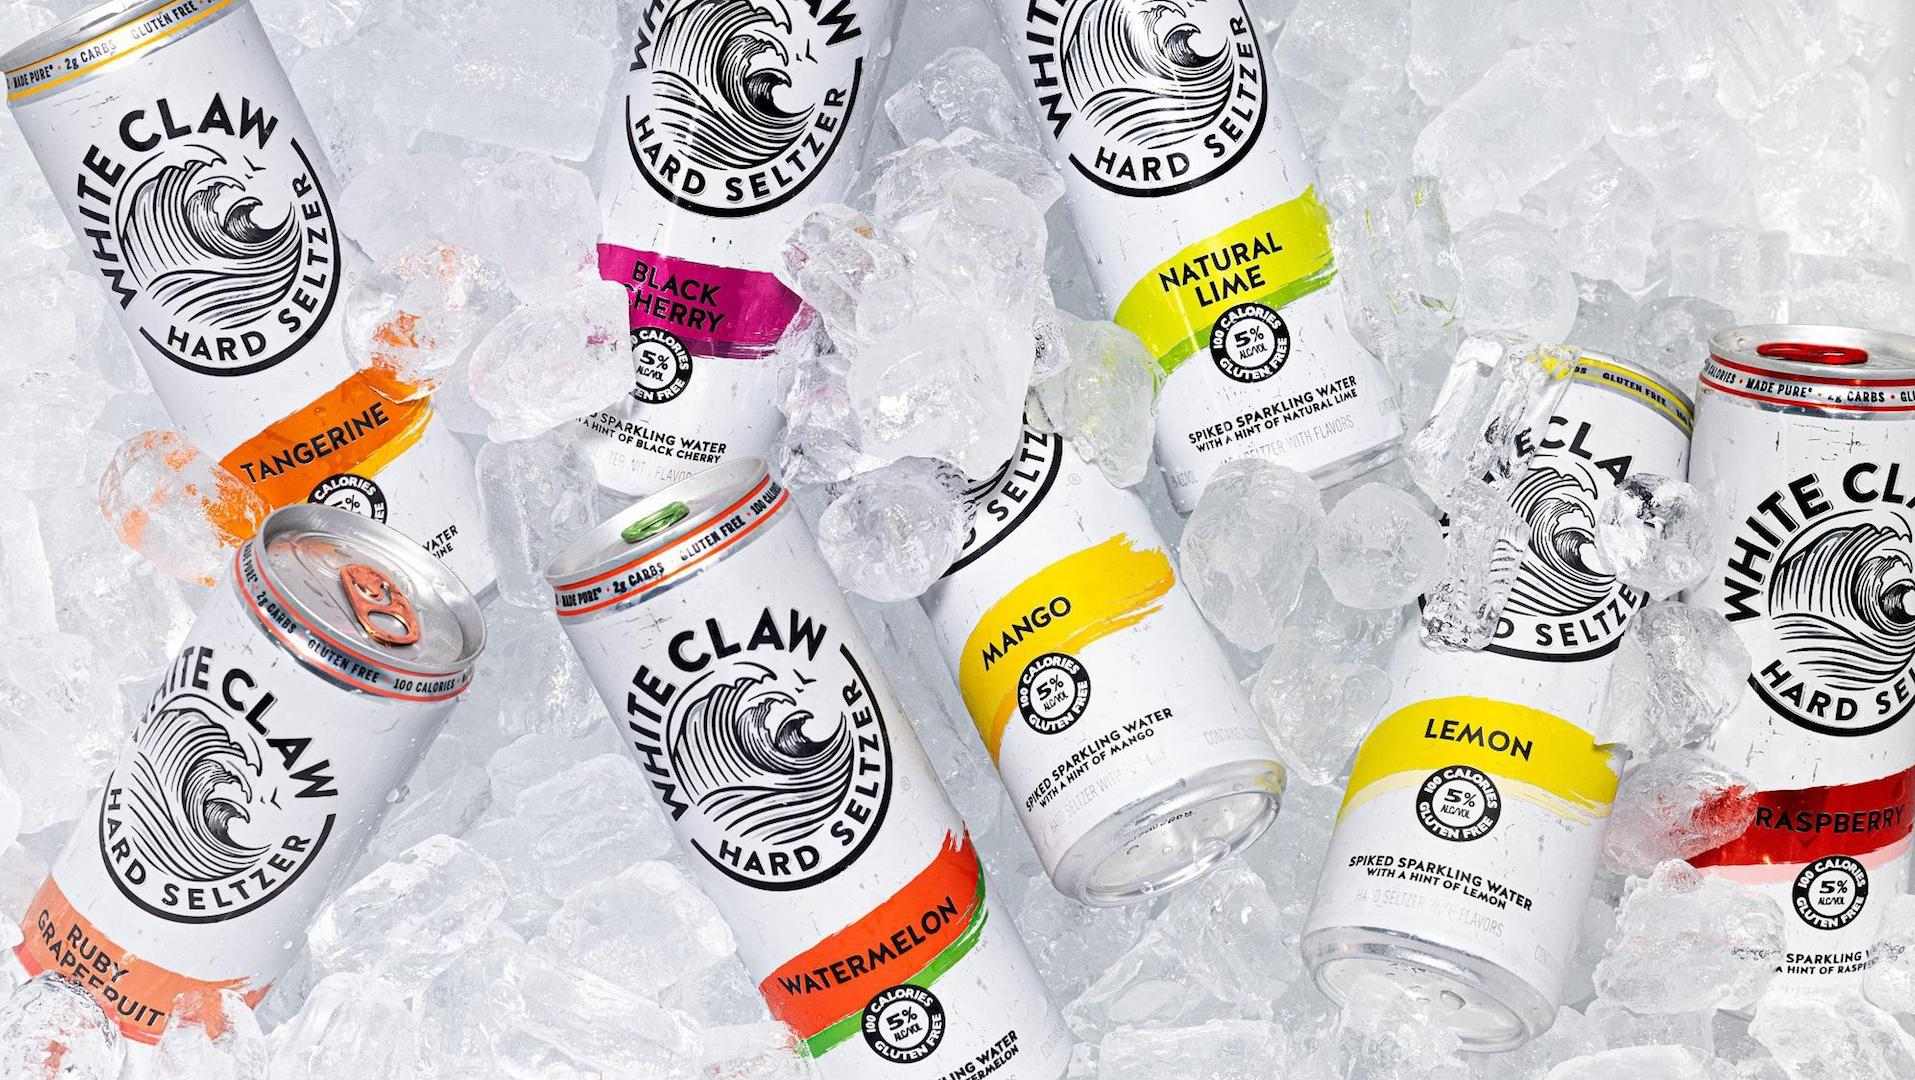 White Claw Is Launching Down Under in 2020 So Get Ready for a Summer of Hard Seltzers